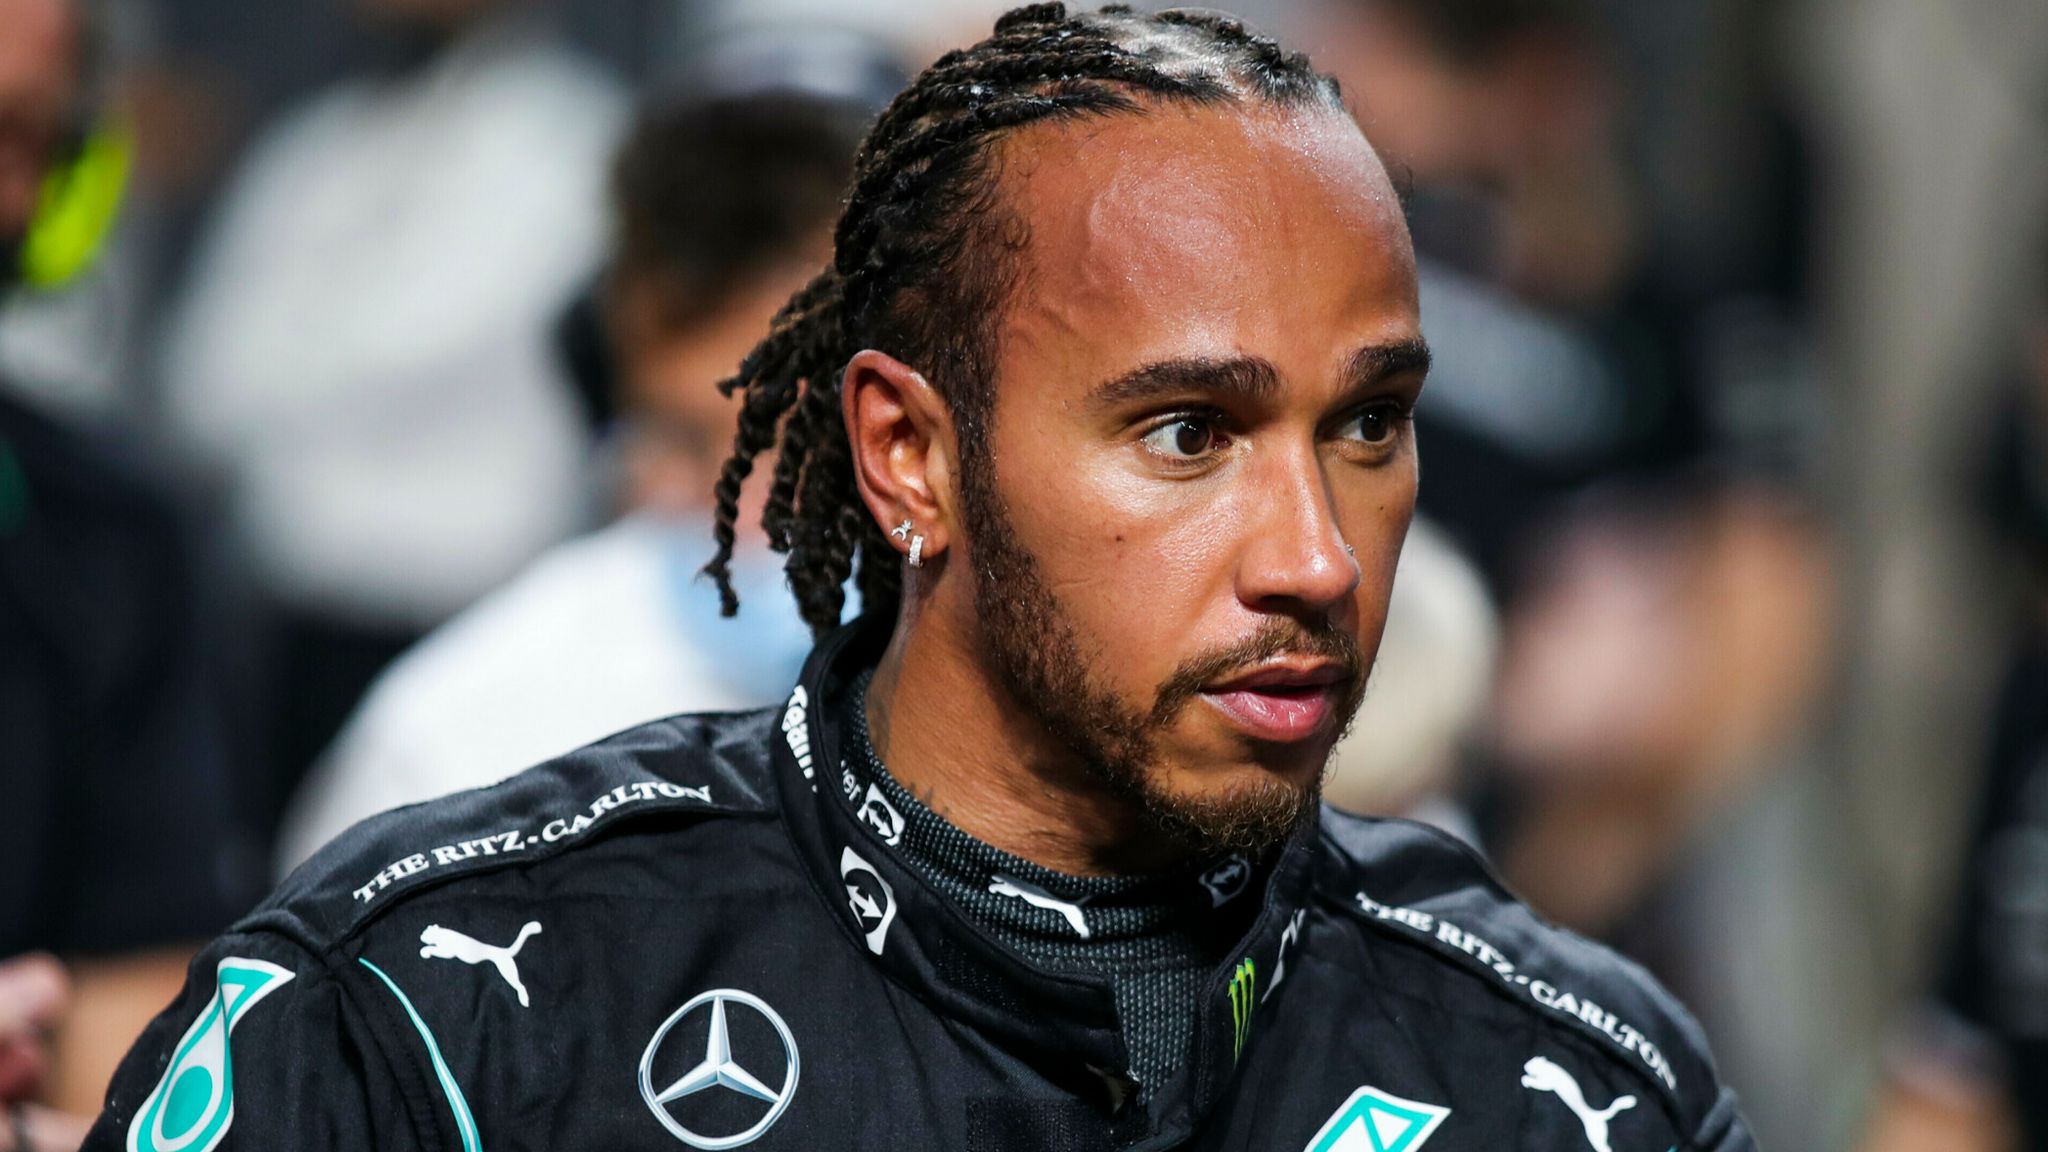 Sir Lewis Hamilton breaks silence for first time since F1's controversial  Abu Dhabi GP decider | UK News | Sky News